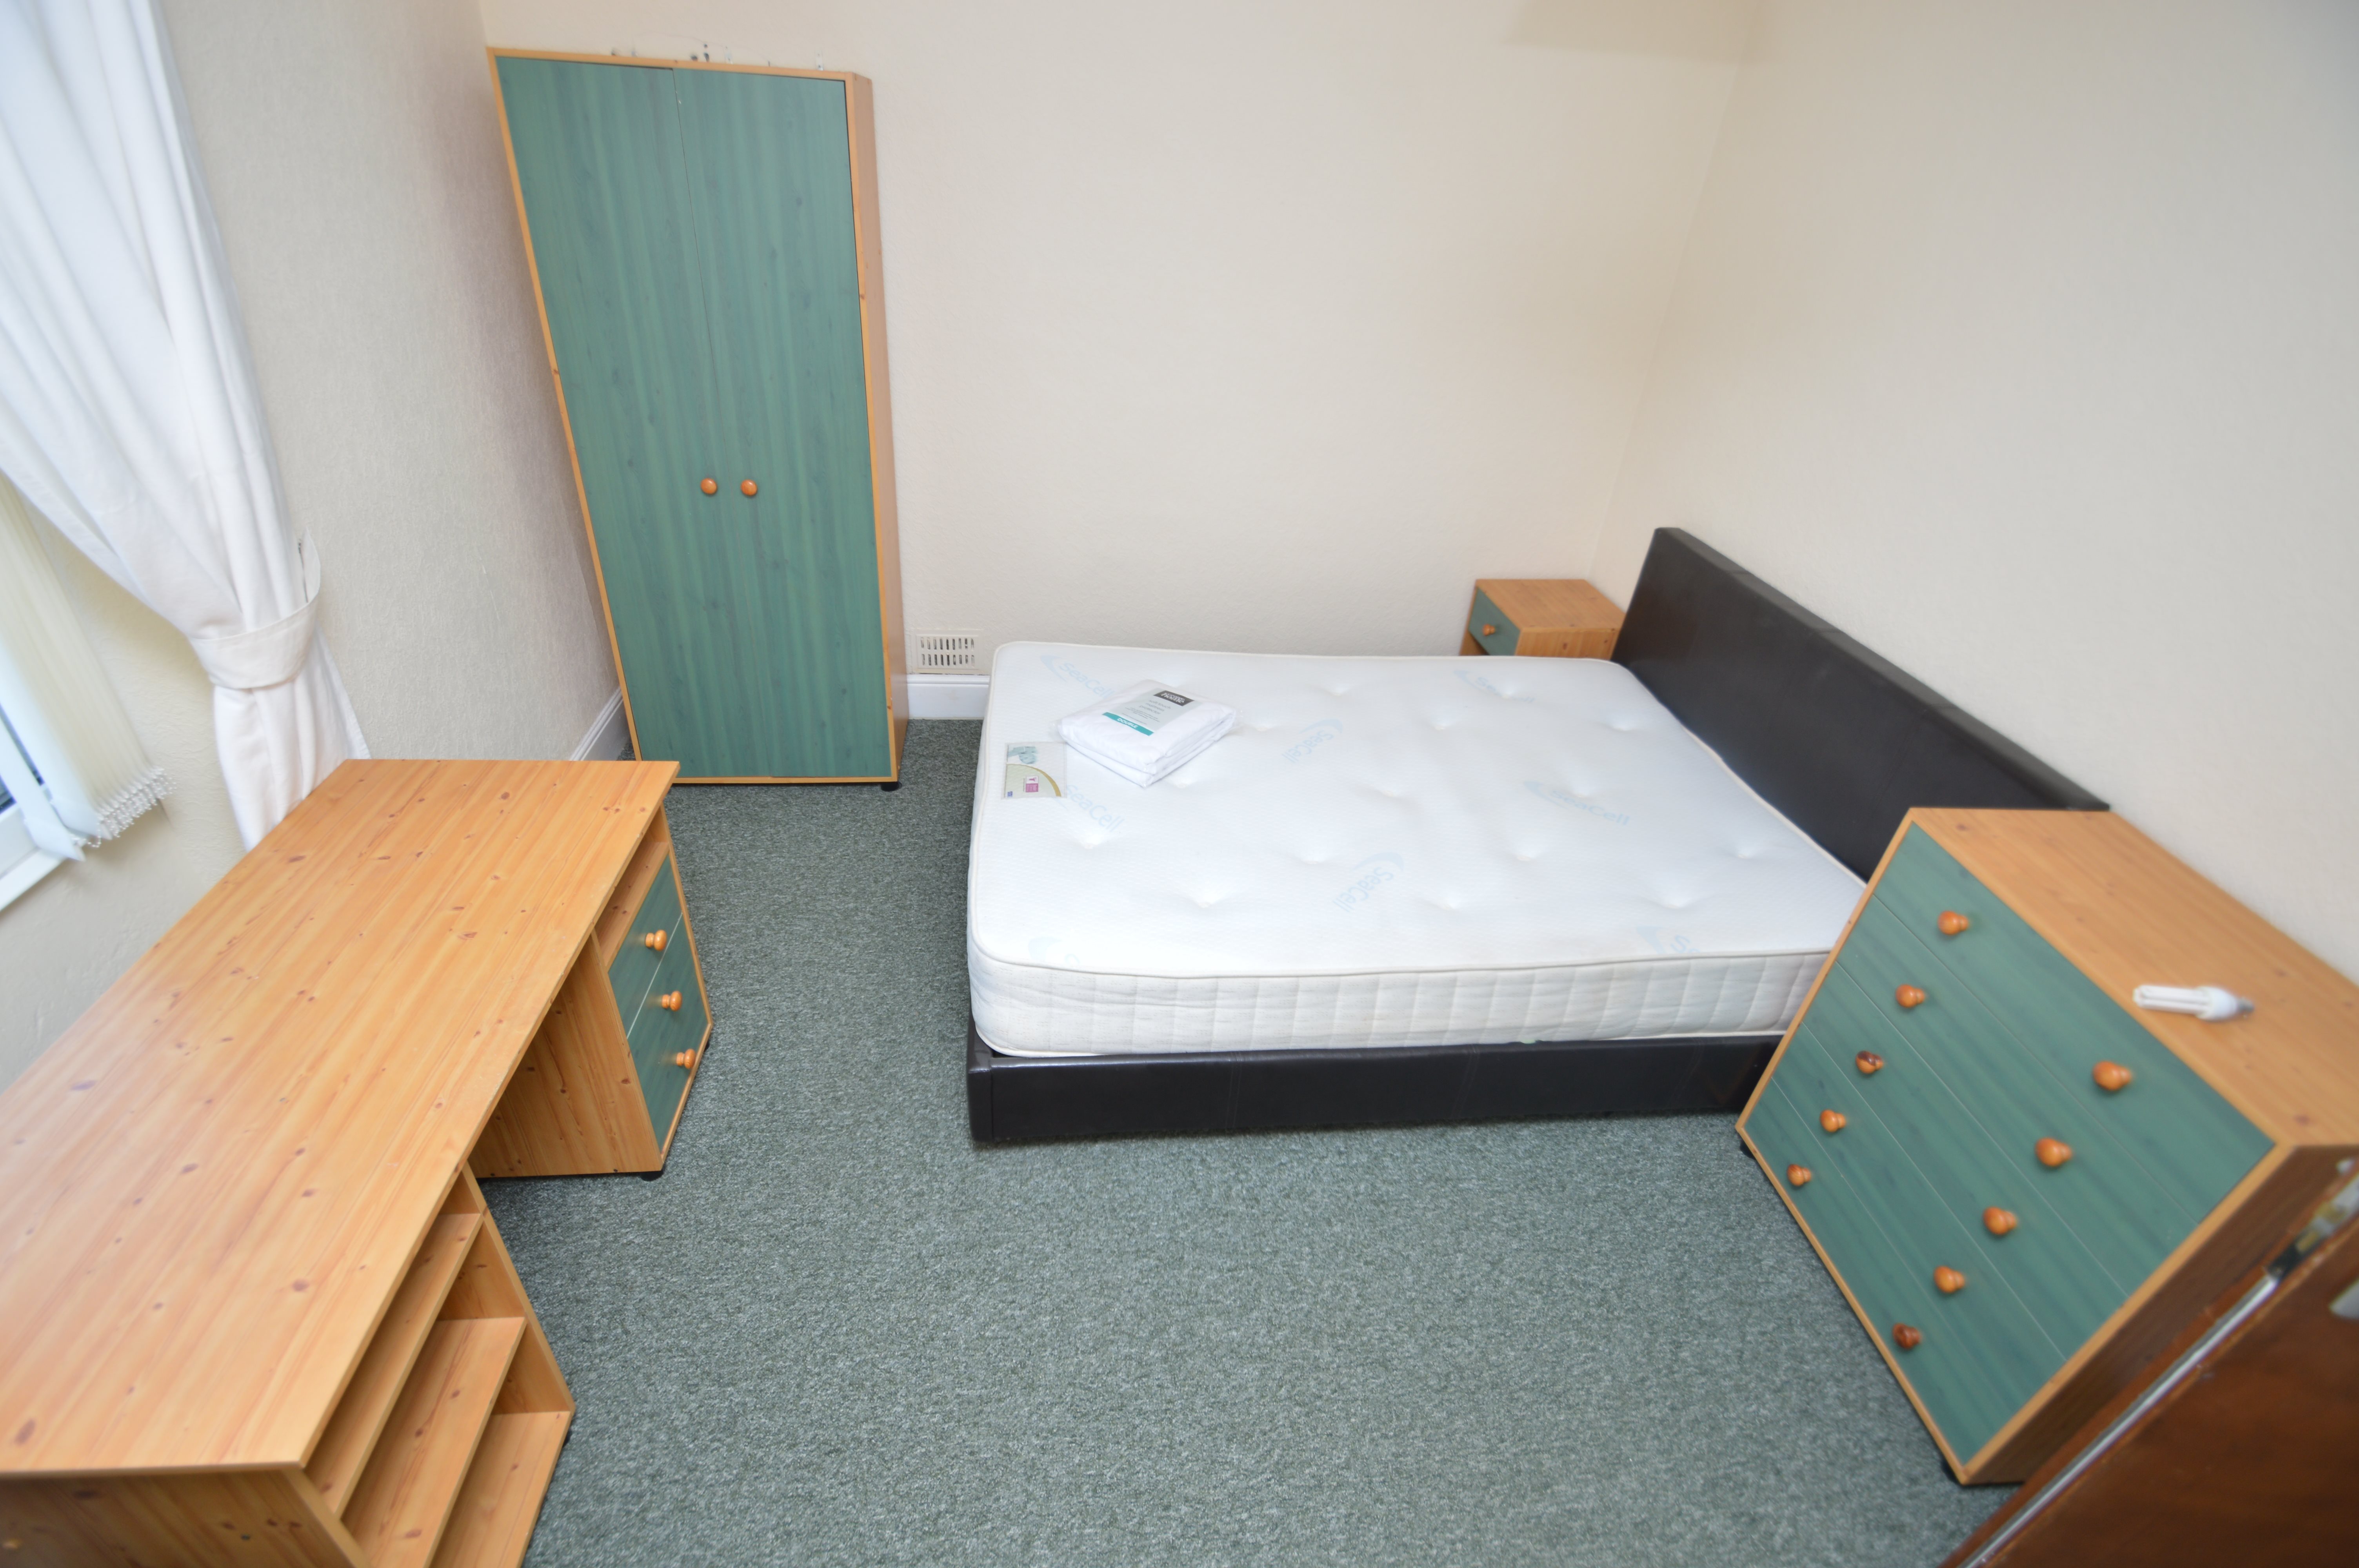 1 bed house / flat share to rent in Wood Road, Treforest - Property Image 1